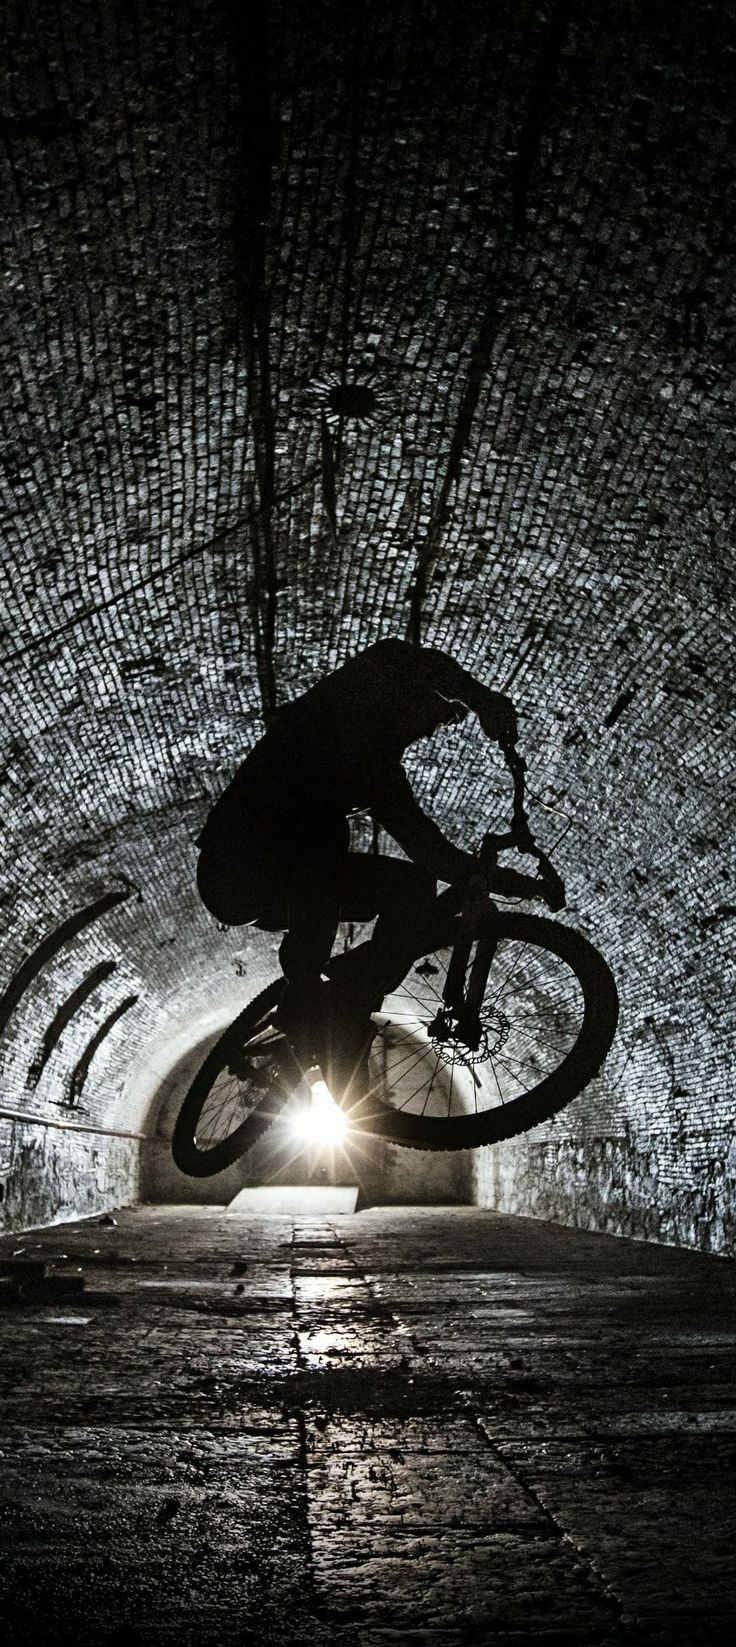 Light at the end of the tunnel. #BMX #Bike